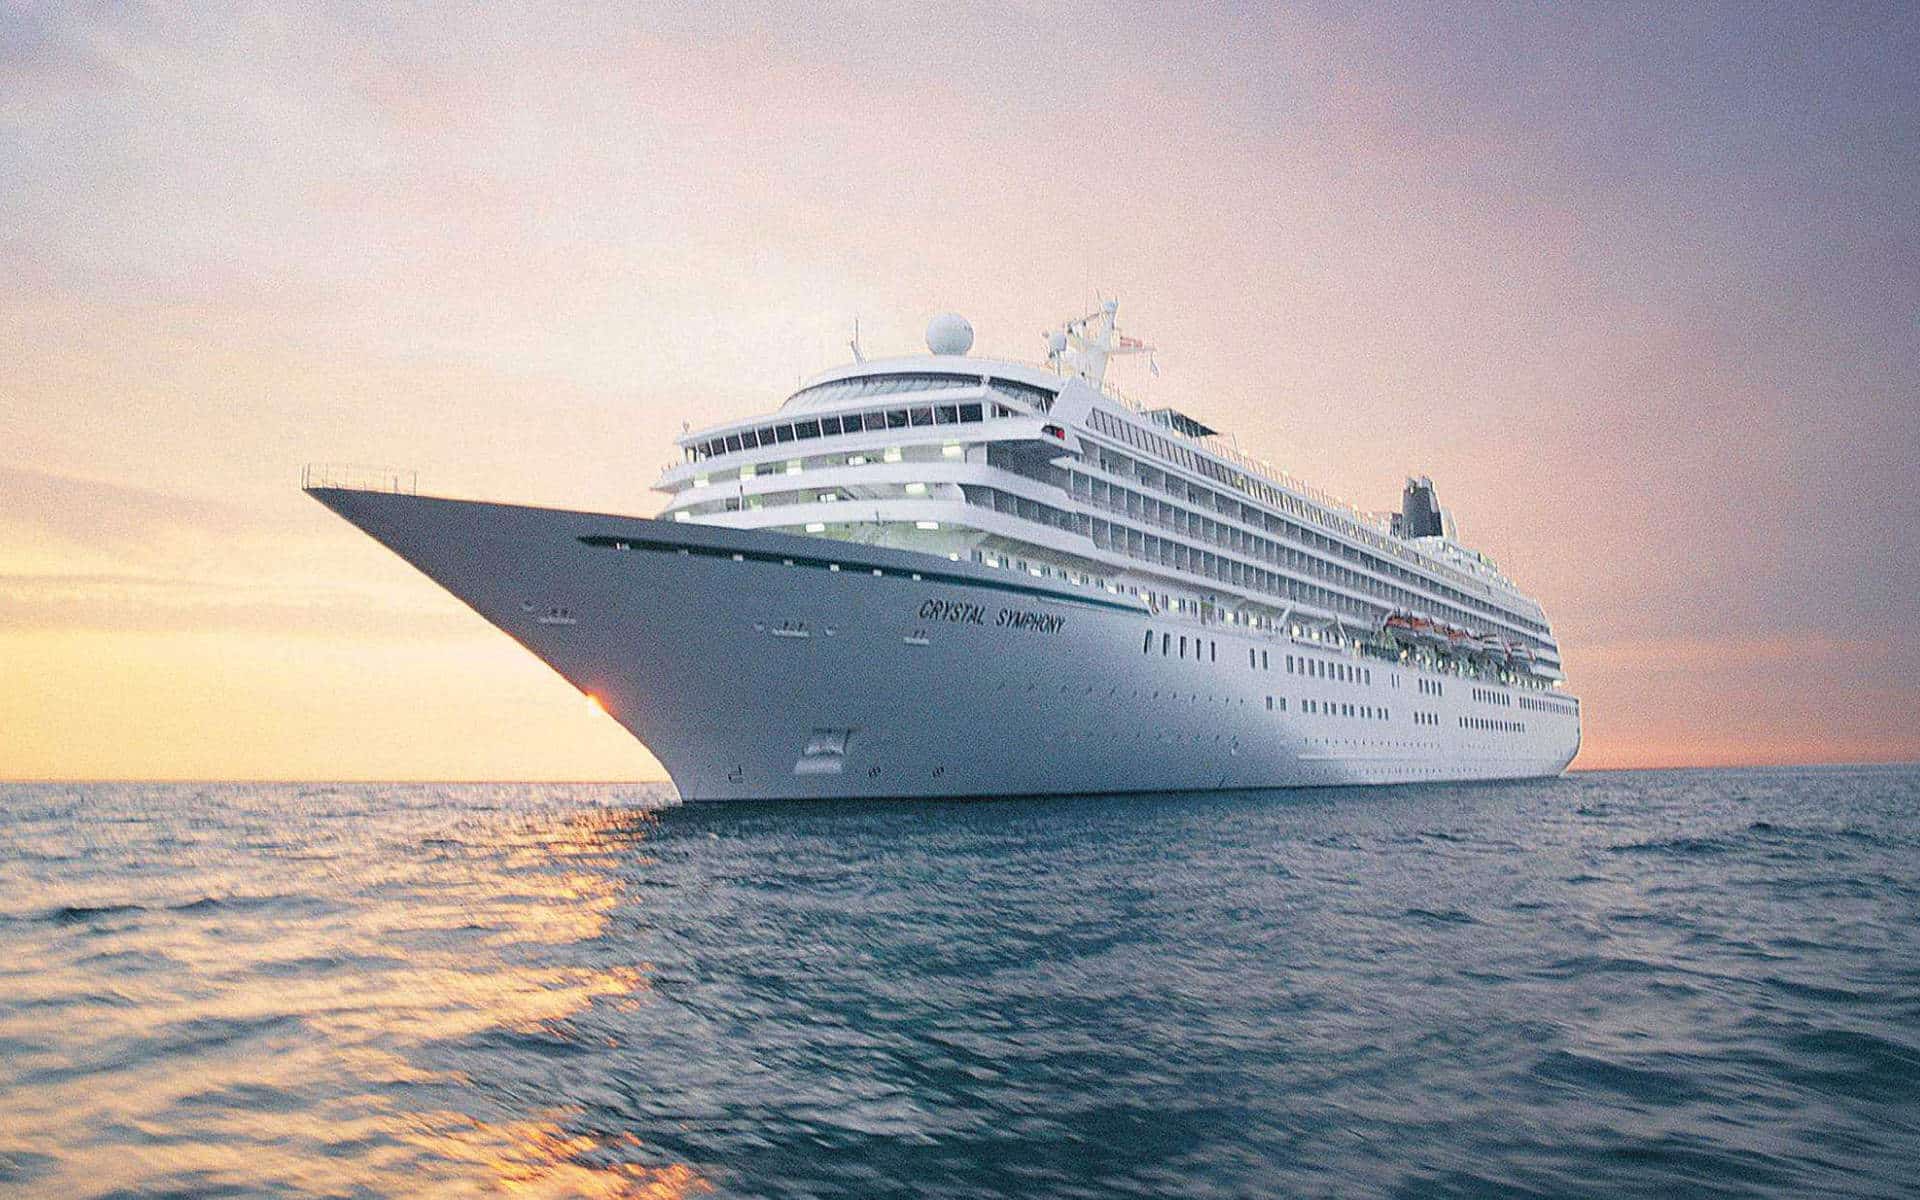 The Crystal Symphony cruise ship, sold to Crystal Cruises buyer the A&K Travel Group.